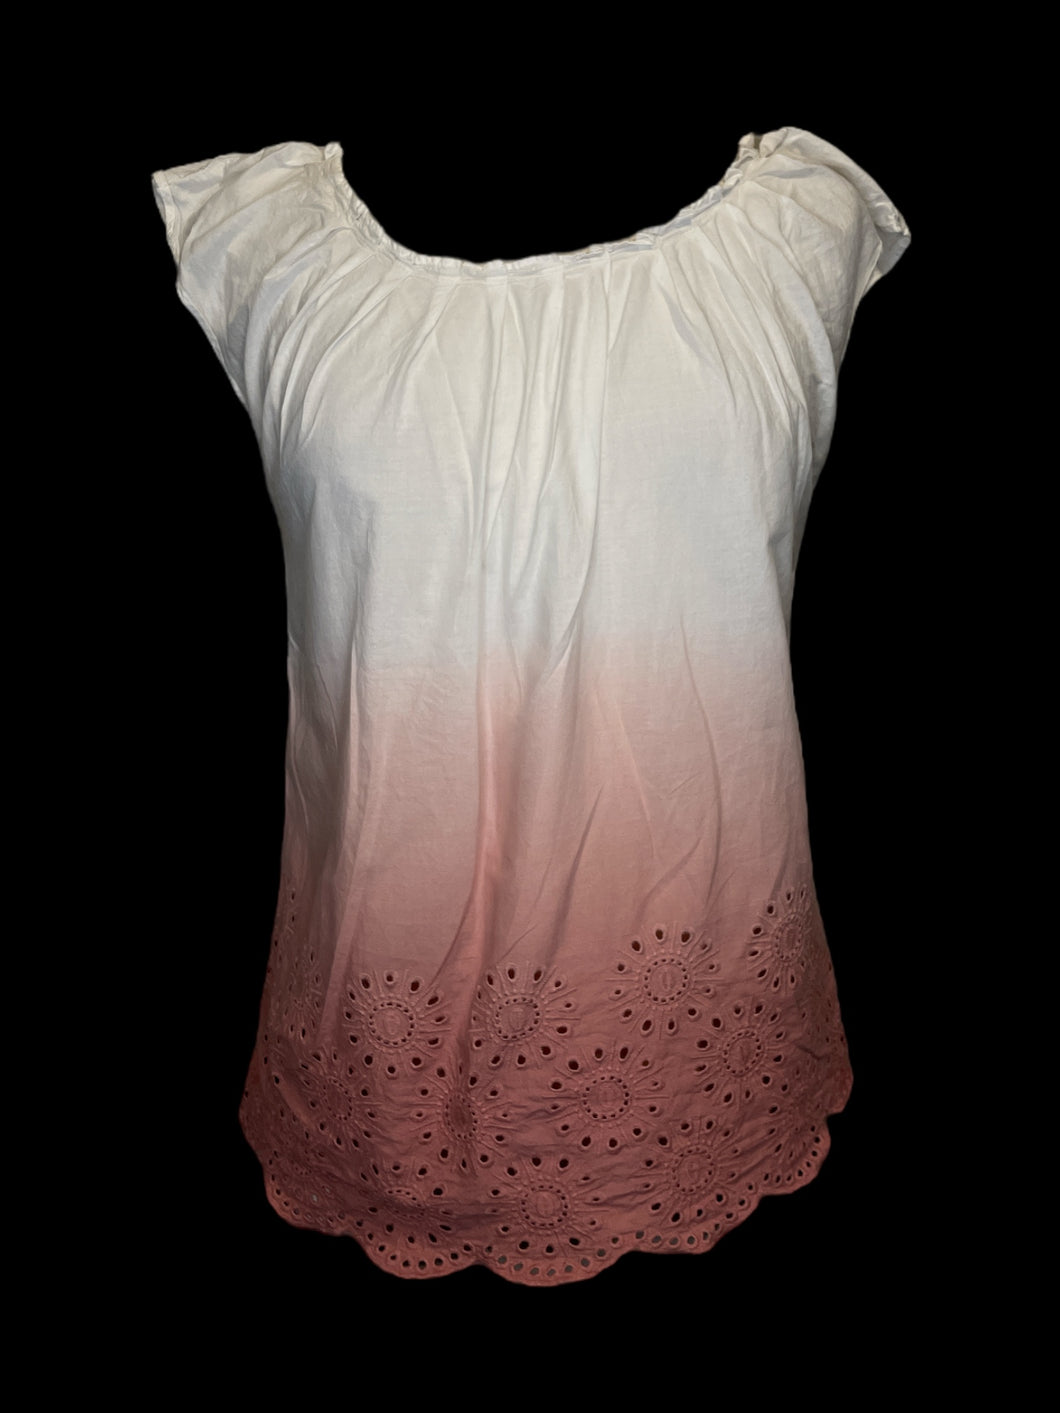 M White & pink ombre top w/ eyelet floral cutouts, scalloped hem, cap sleeves, tie keyhole back, & ruffled scoop neckline